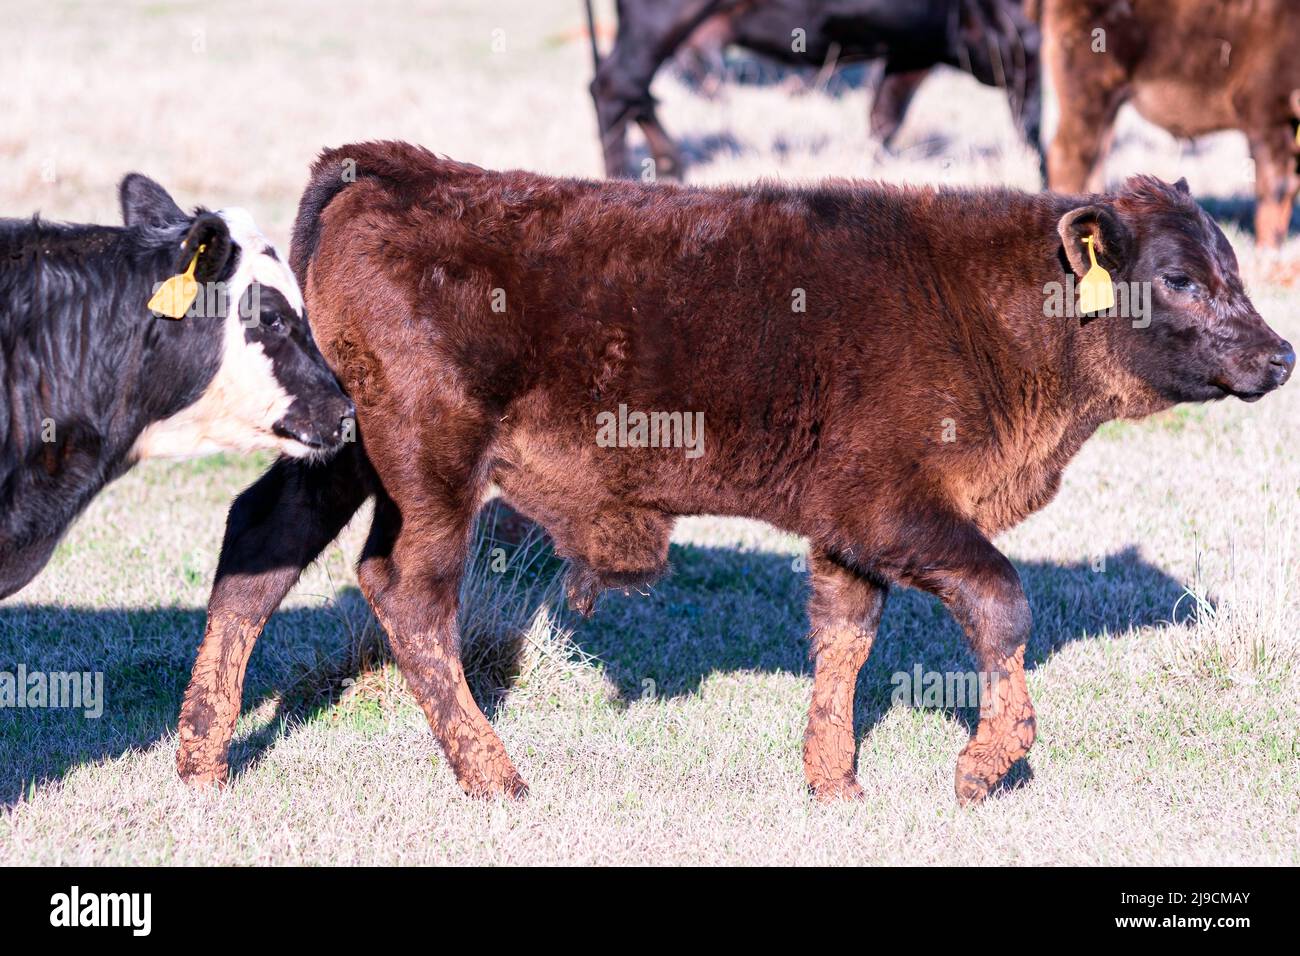 Angus crossbred calf with an abdominal hernia in its navel region. Stock Photo